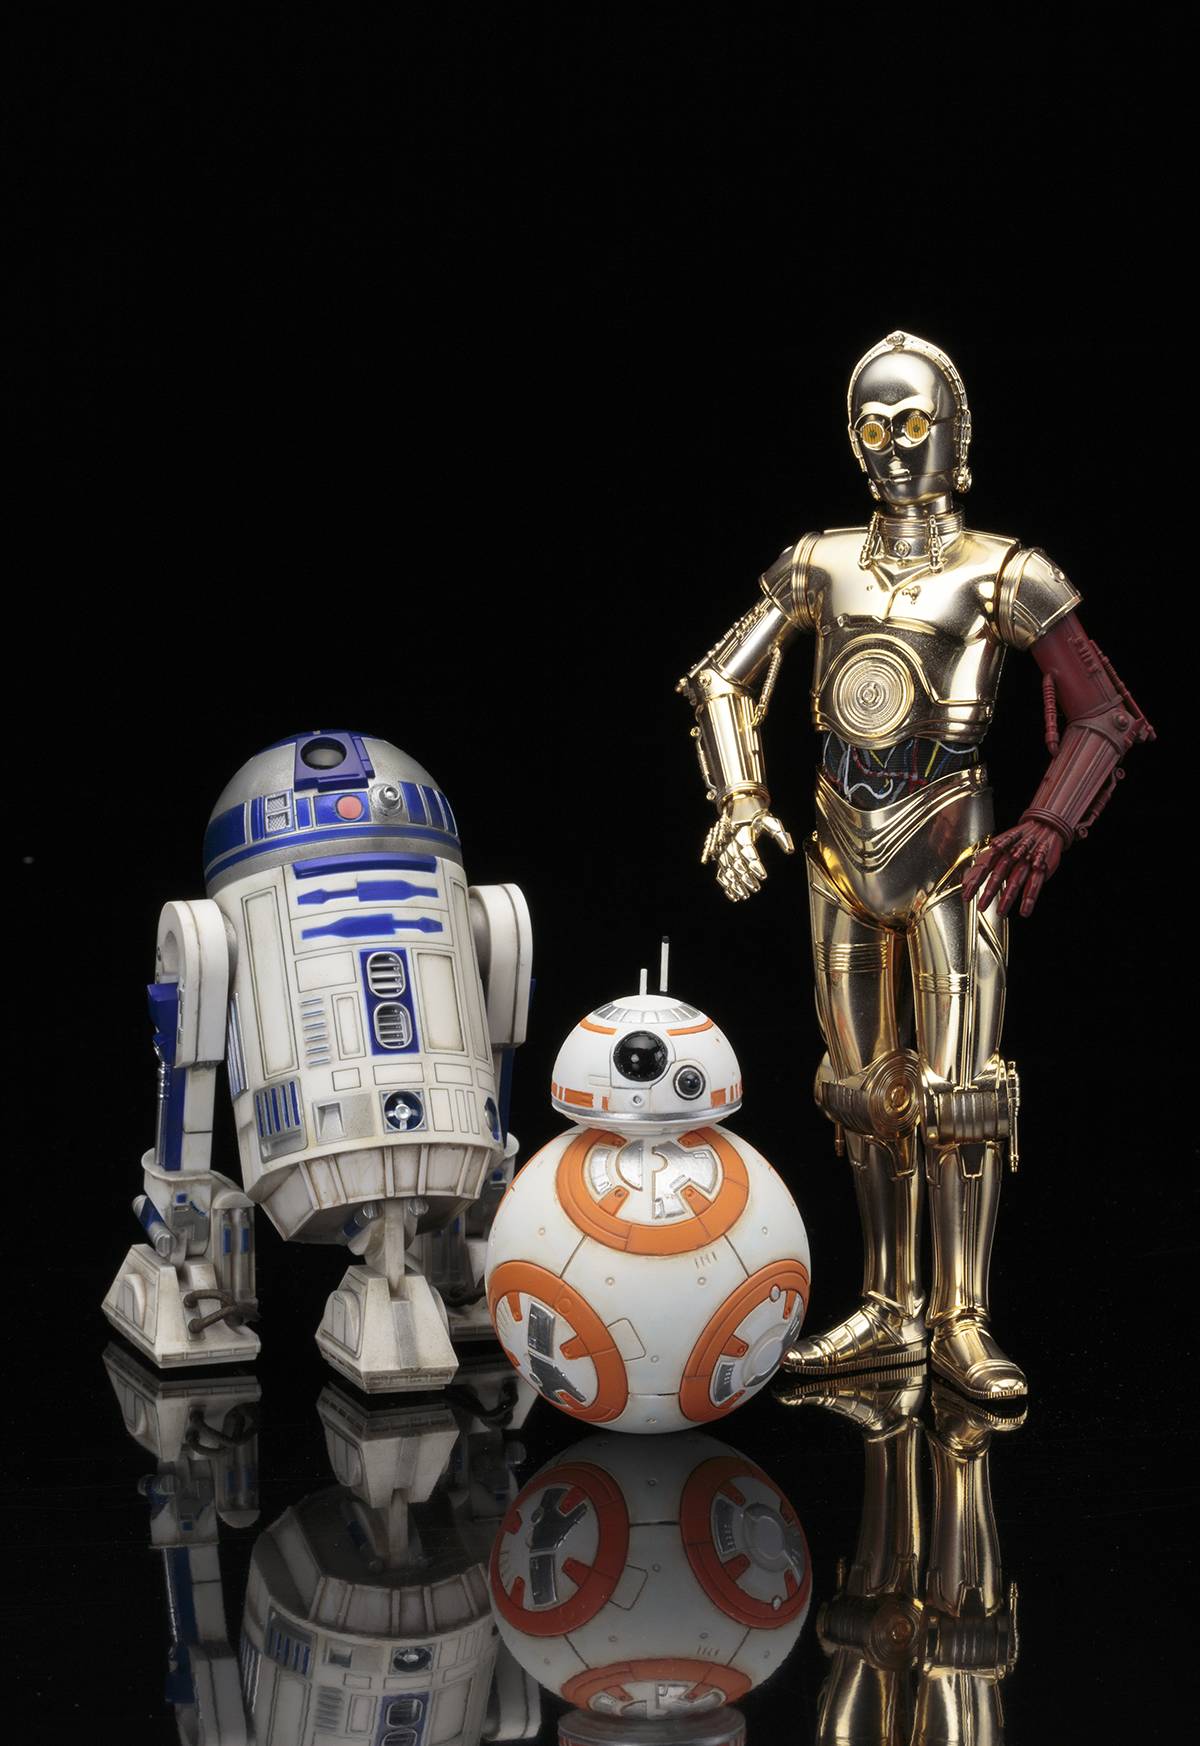 Star Wars The Force Awakens R2D2 R2-D2 & BB-8 Action Figure Movie Toy 